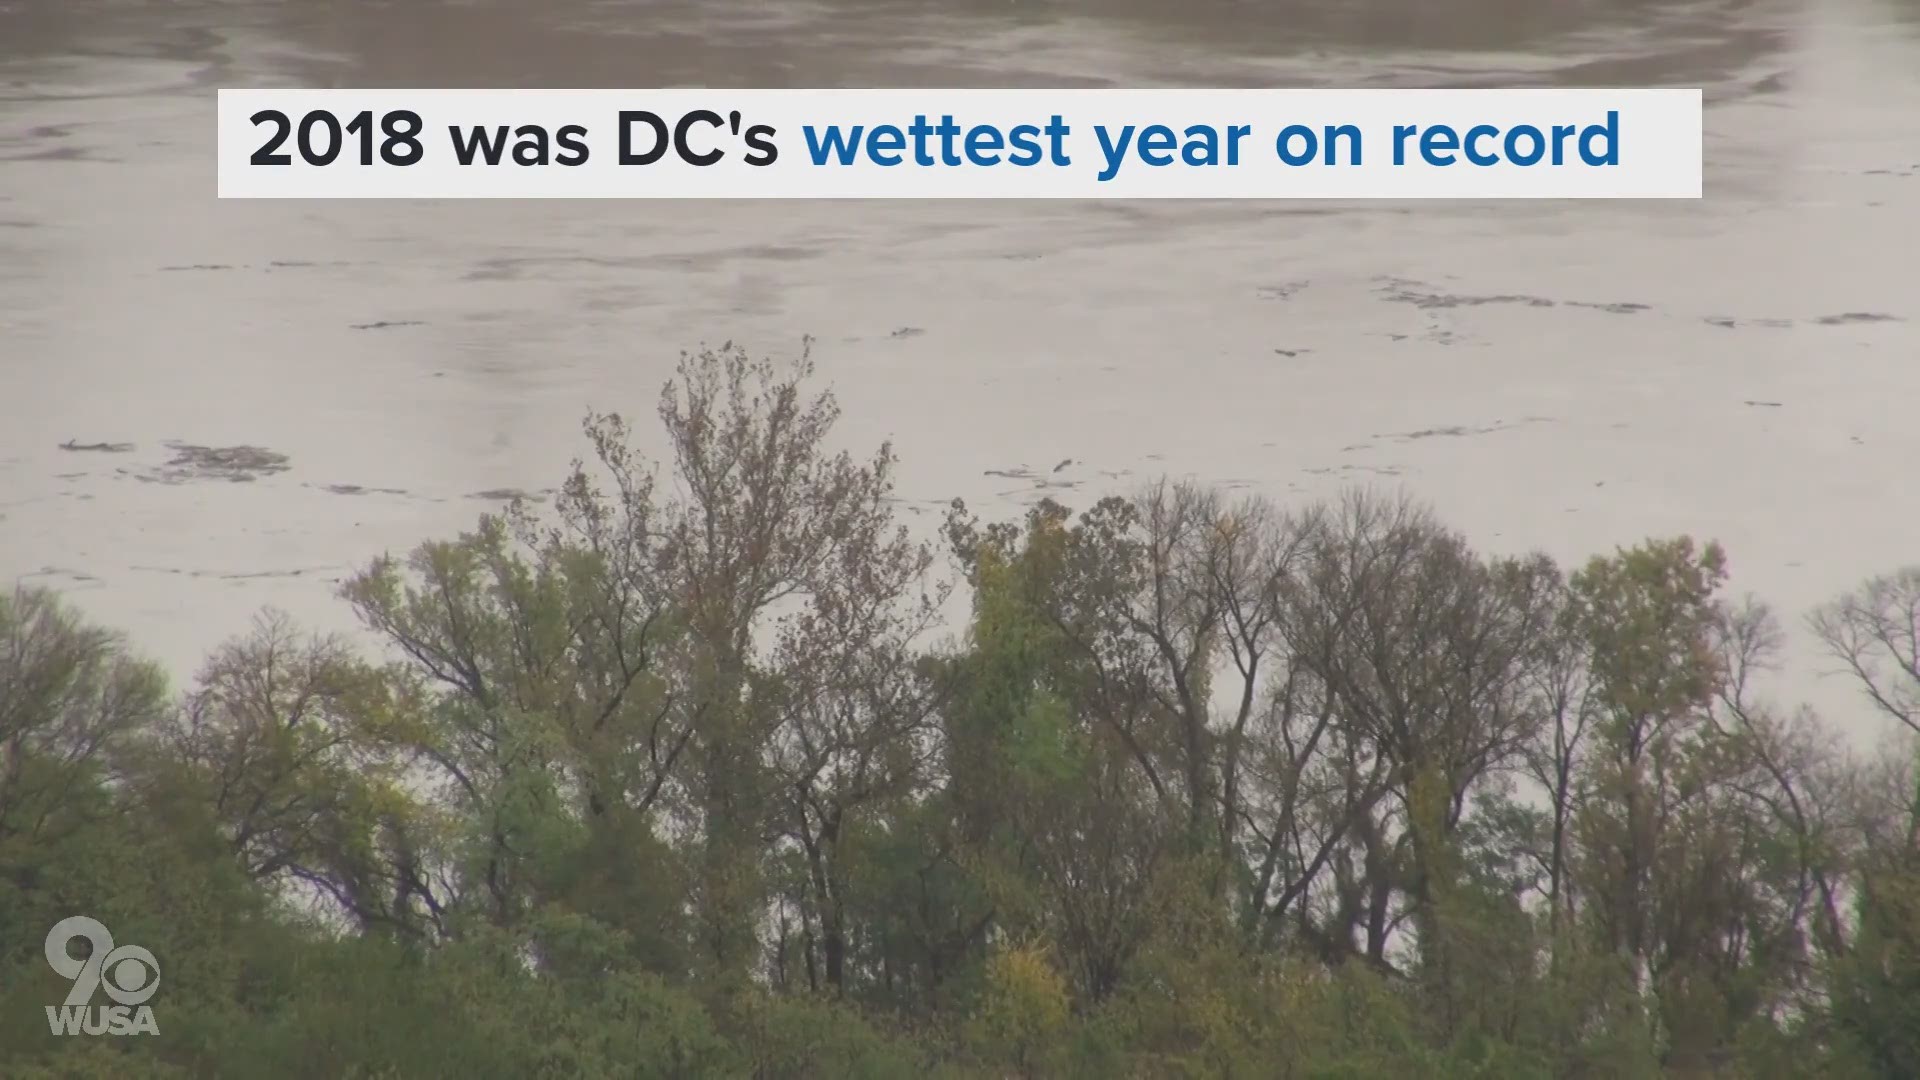 It's off to a wetter start than 2018, which was DC's wettest year on record